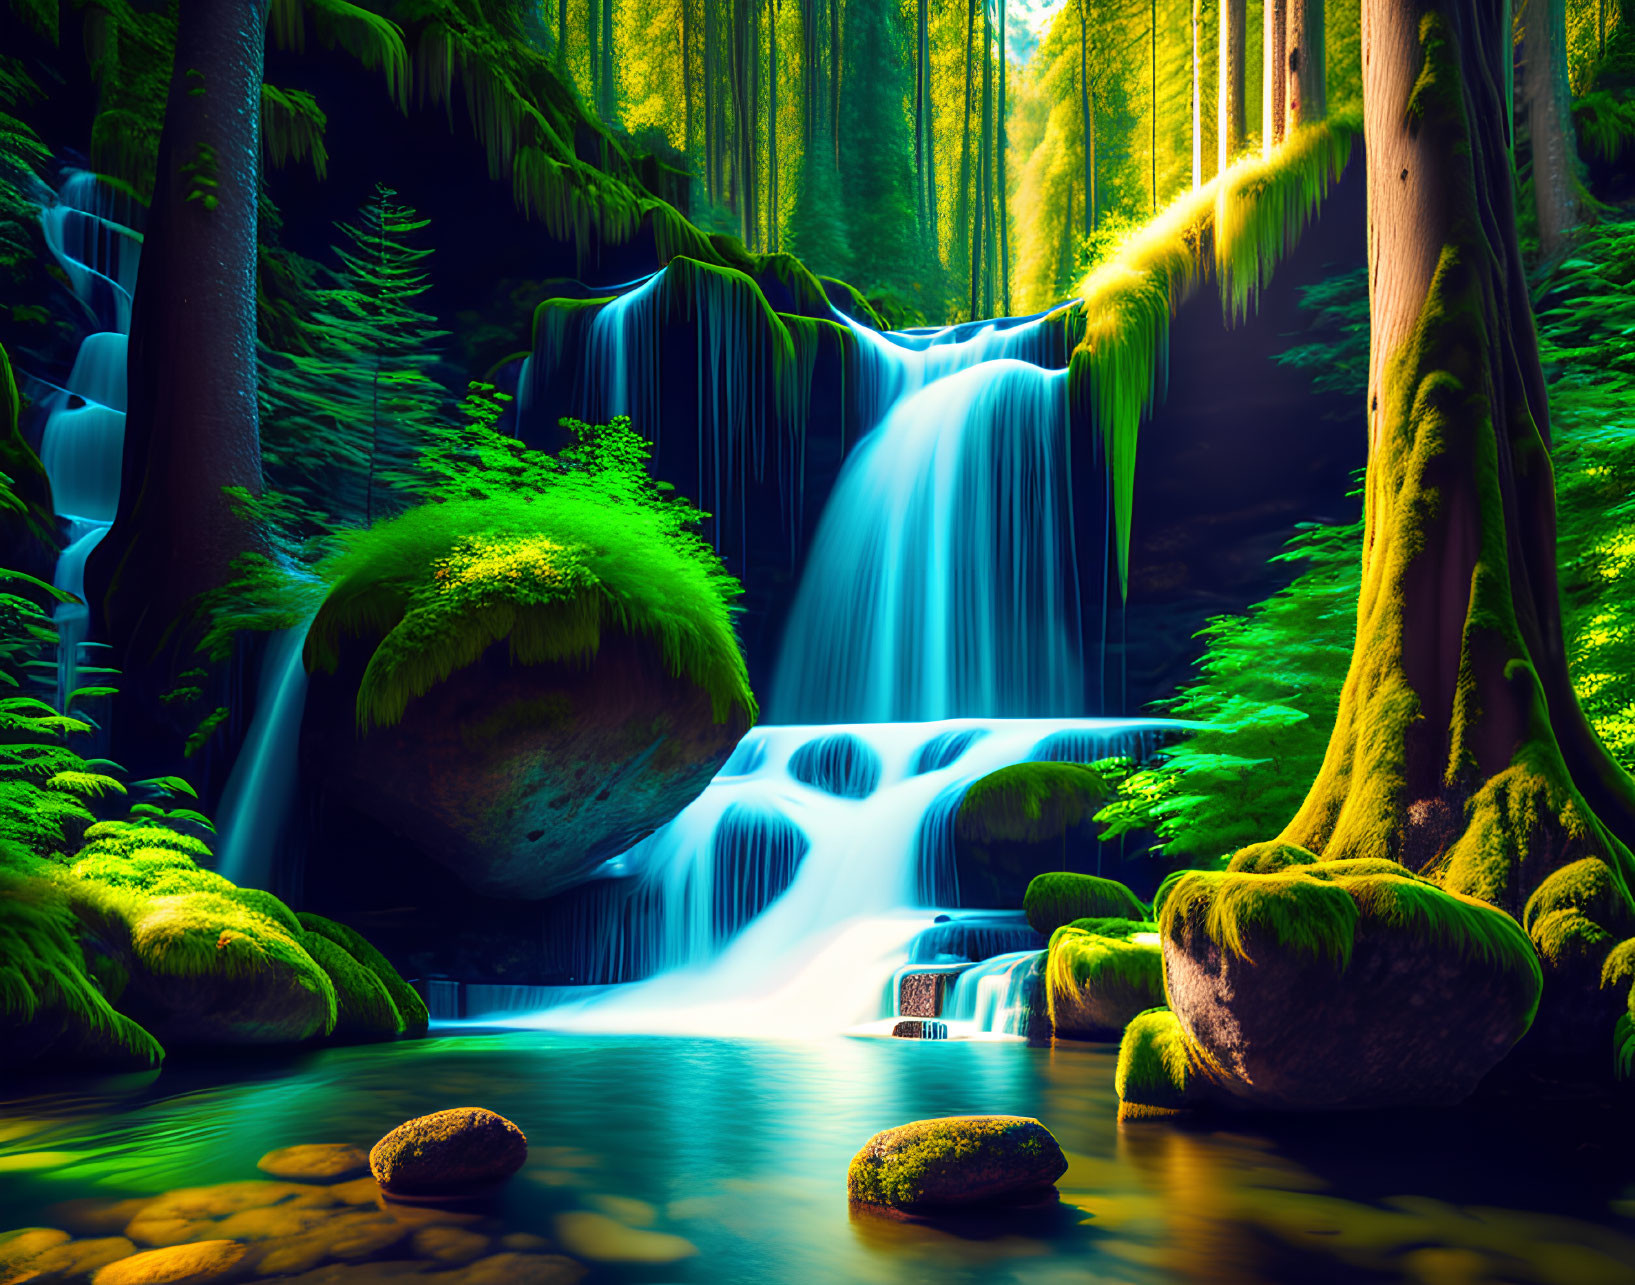 Tranquil waterfall in lush greenery with sunlight rays